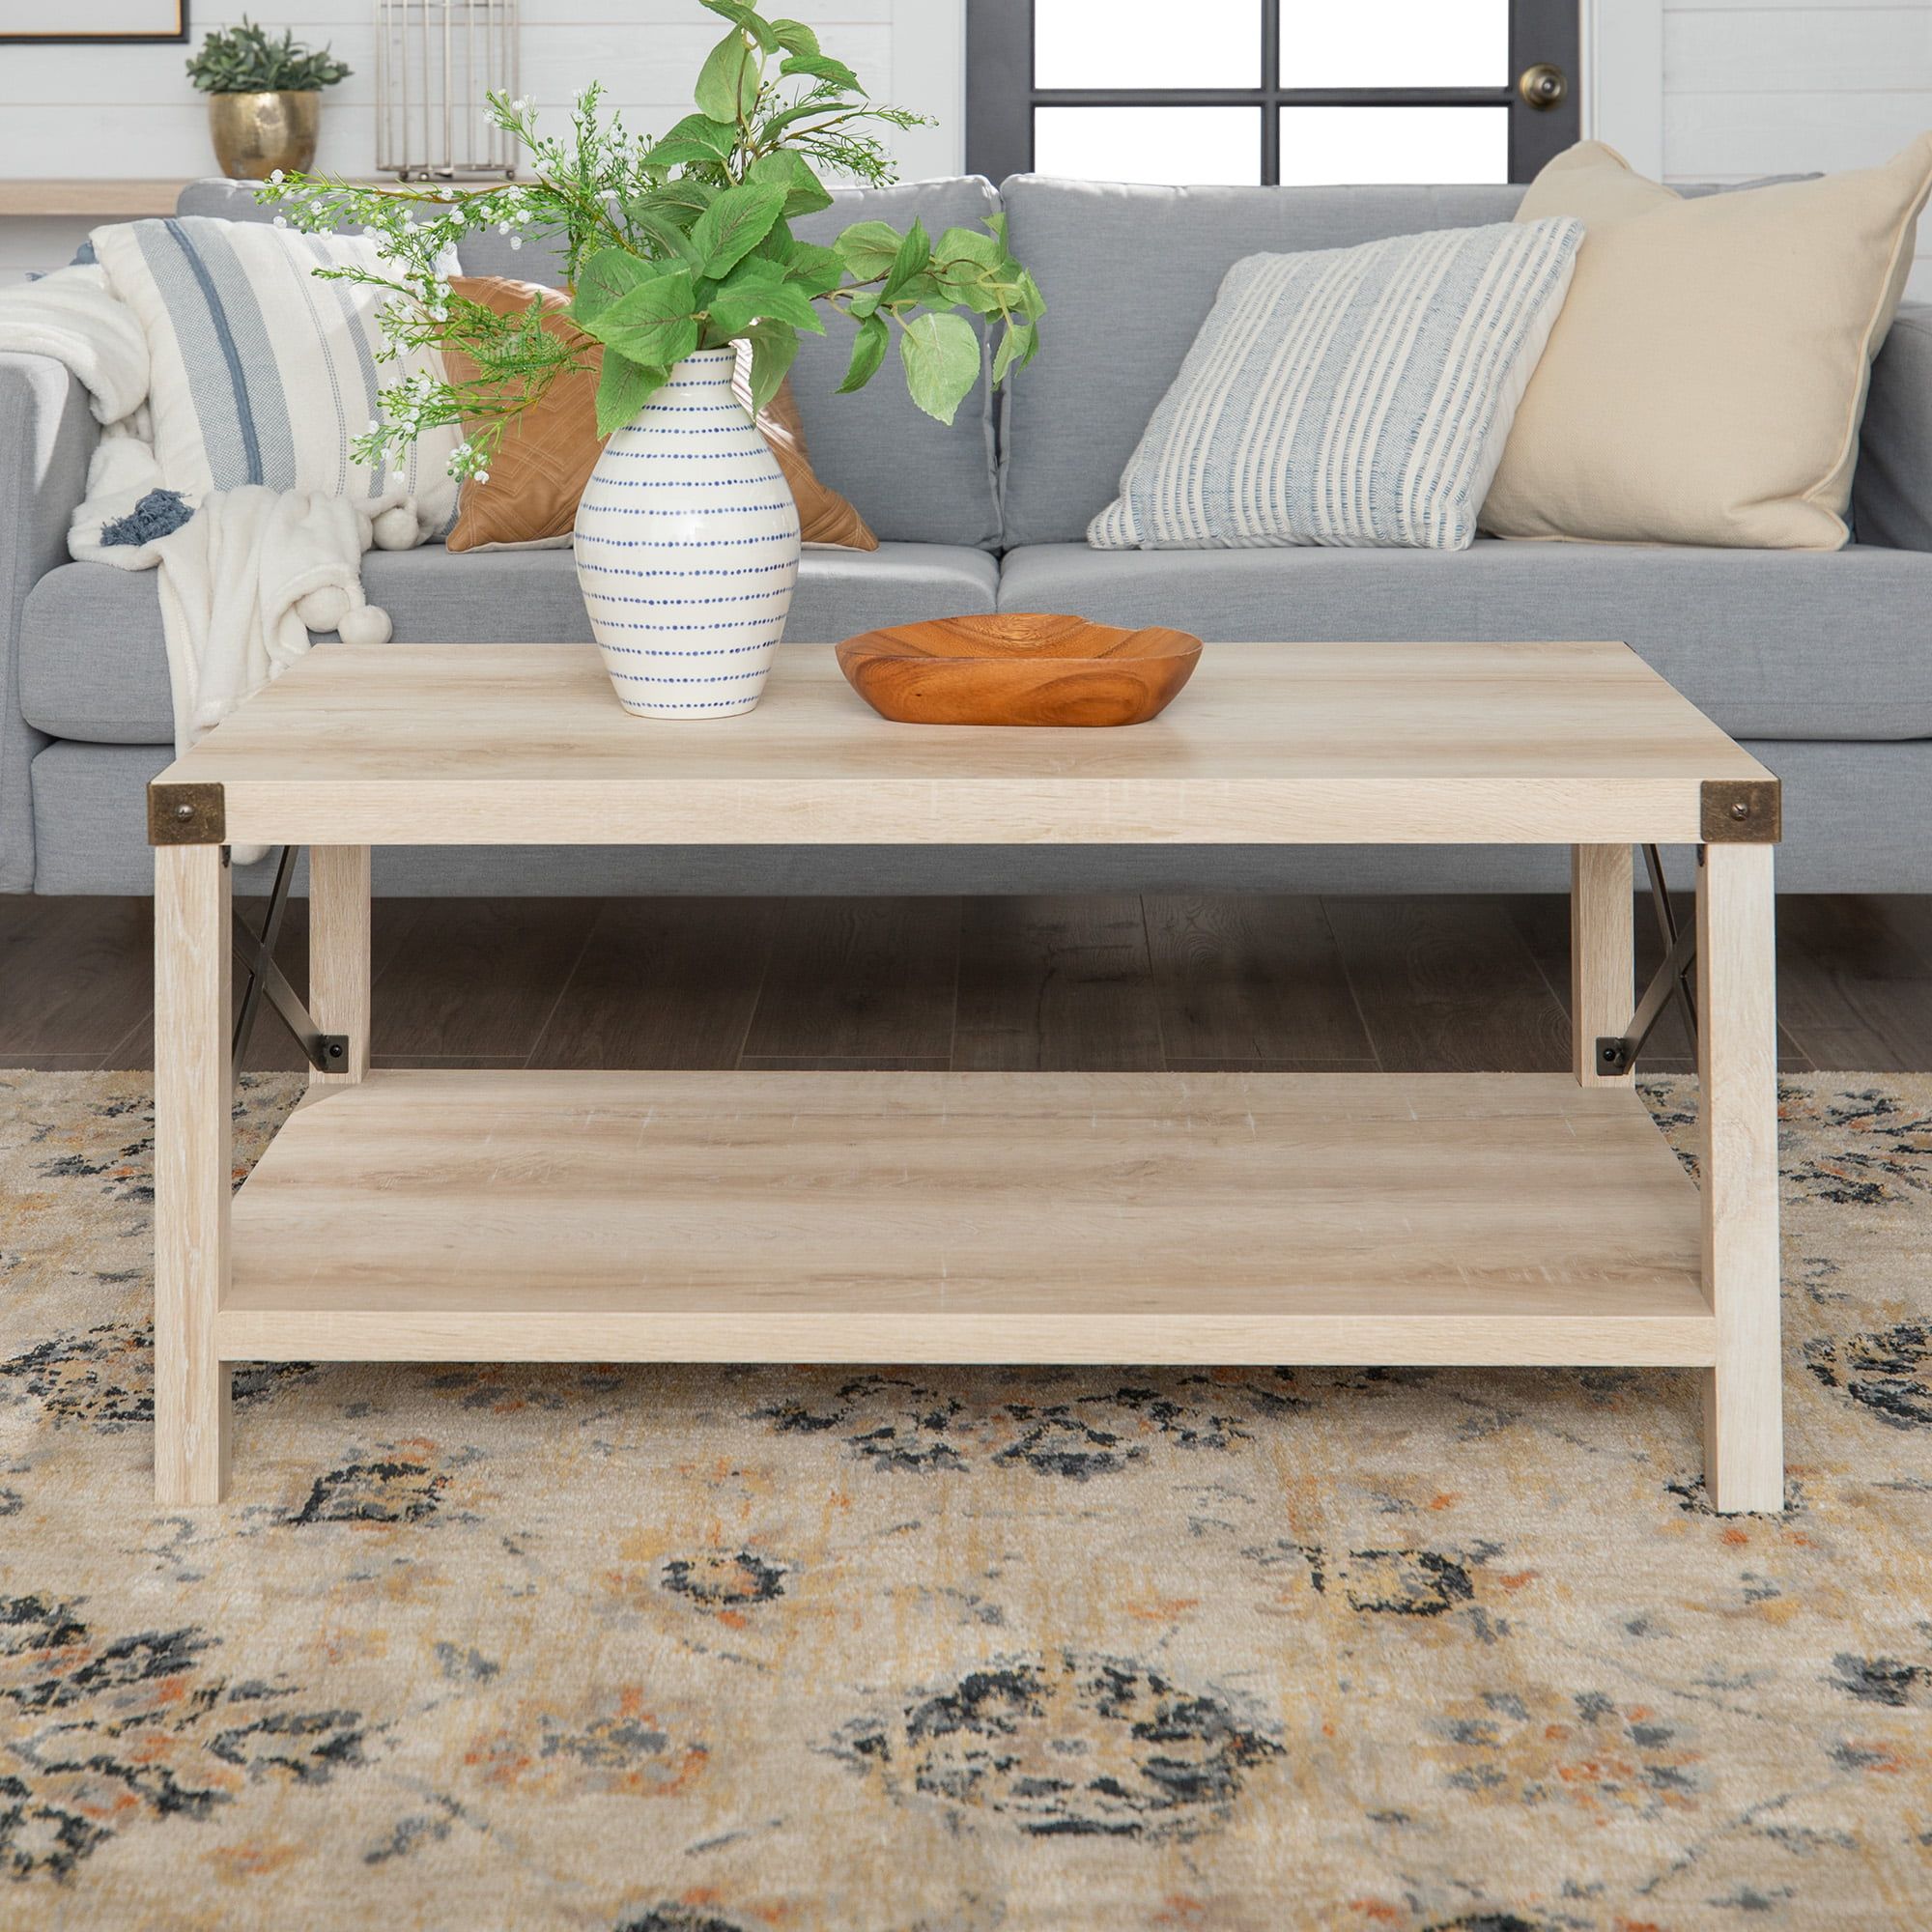 Manor Park 3 Piece Rustic Wood & Metal Coffee Table Set – White Oak Pertaining To Rustic Coffee Tables (Gallery 18 of 20)